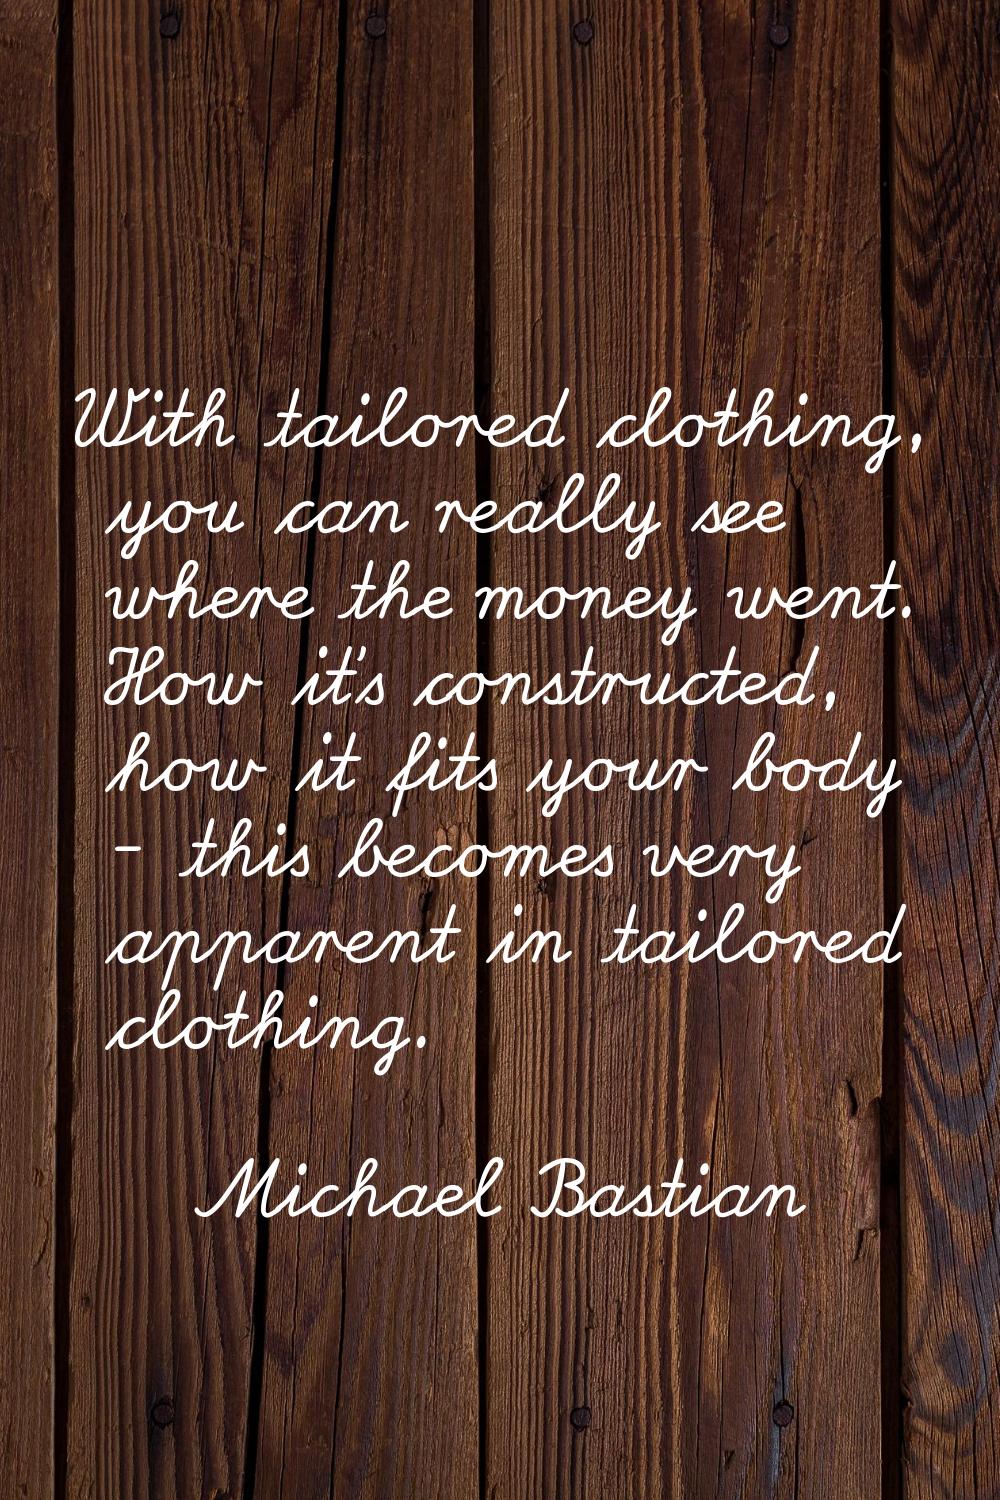 With tailored clothing, you can really see where the money went. How it's constructed, how it fits 